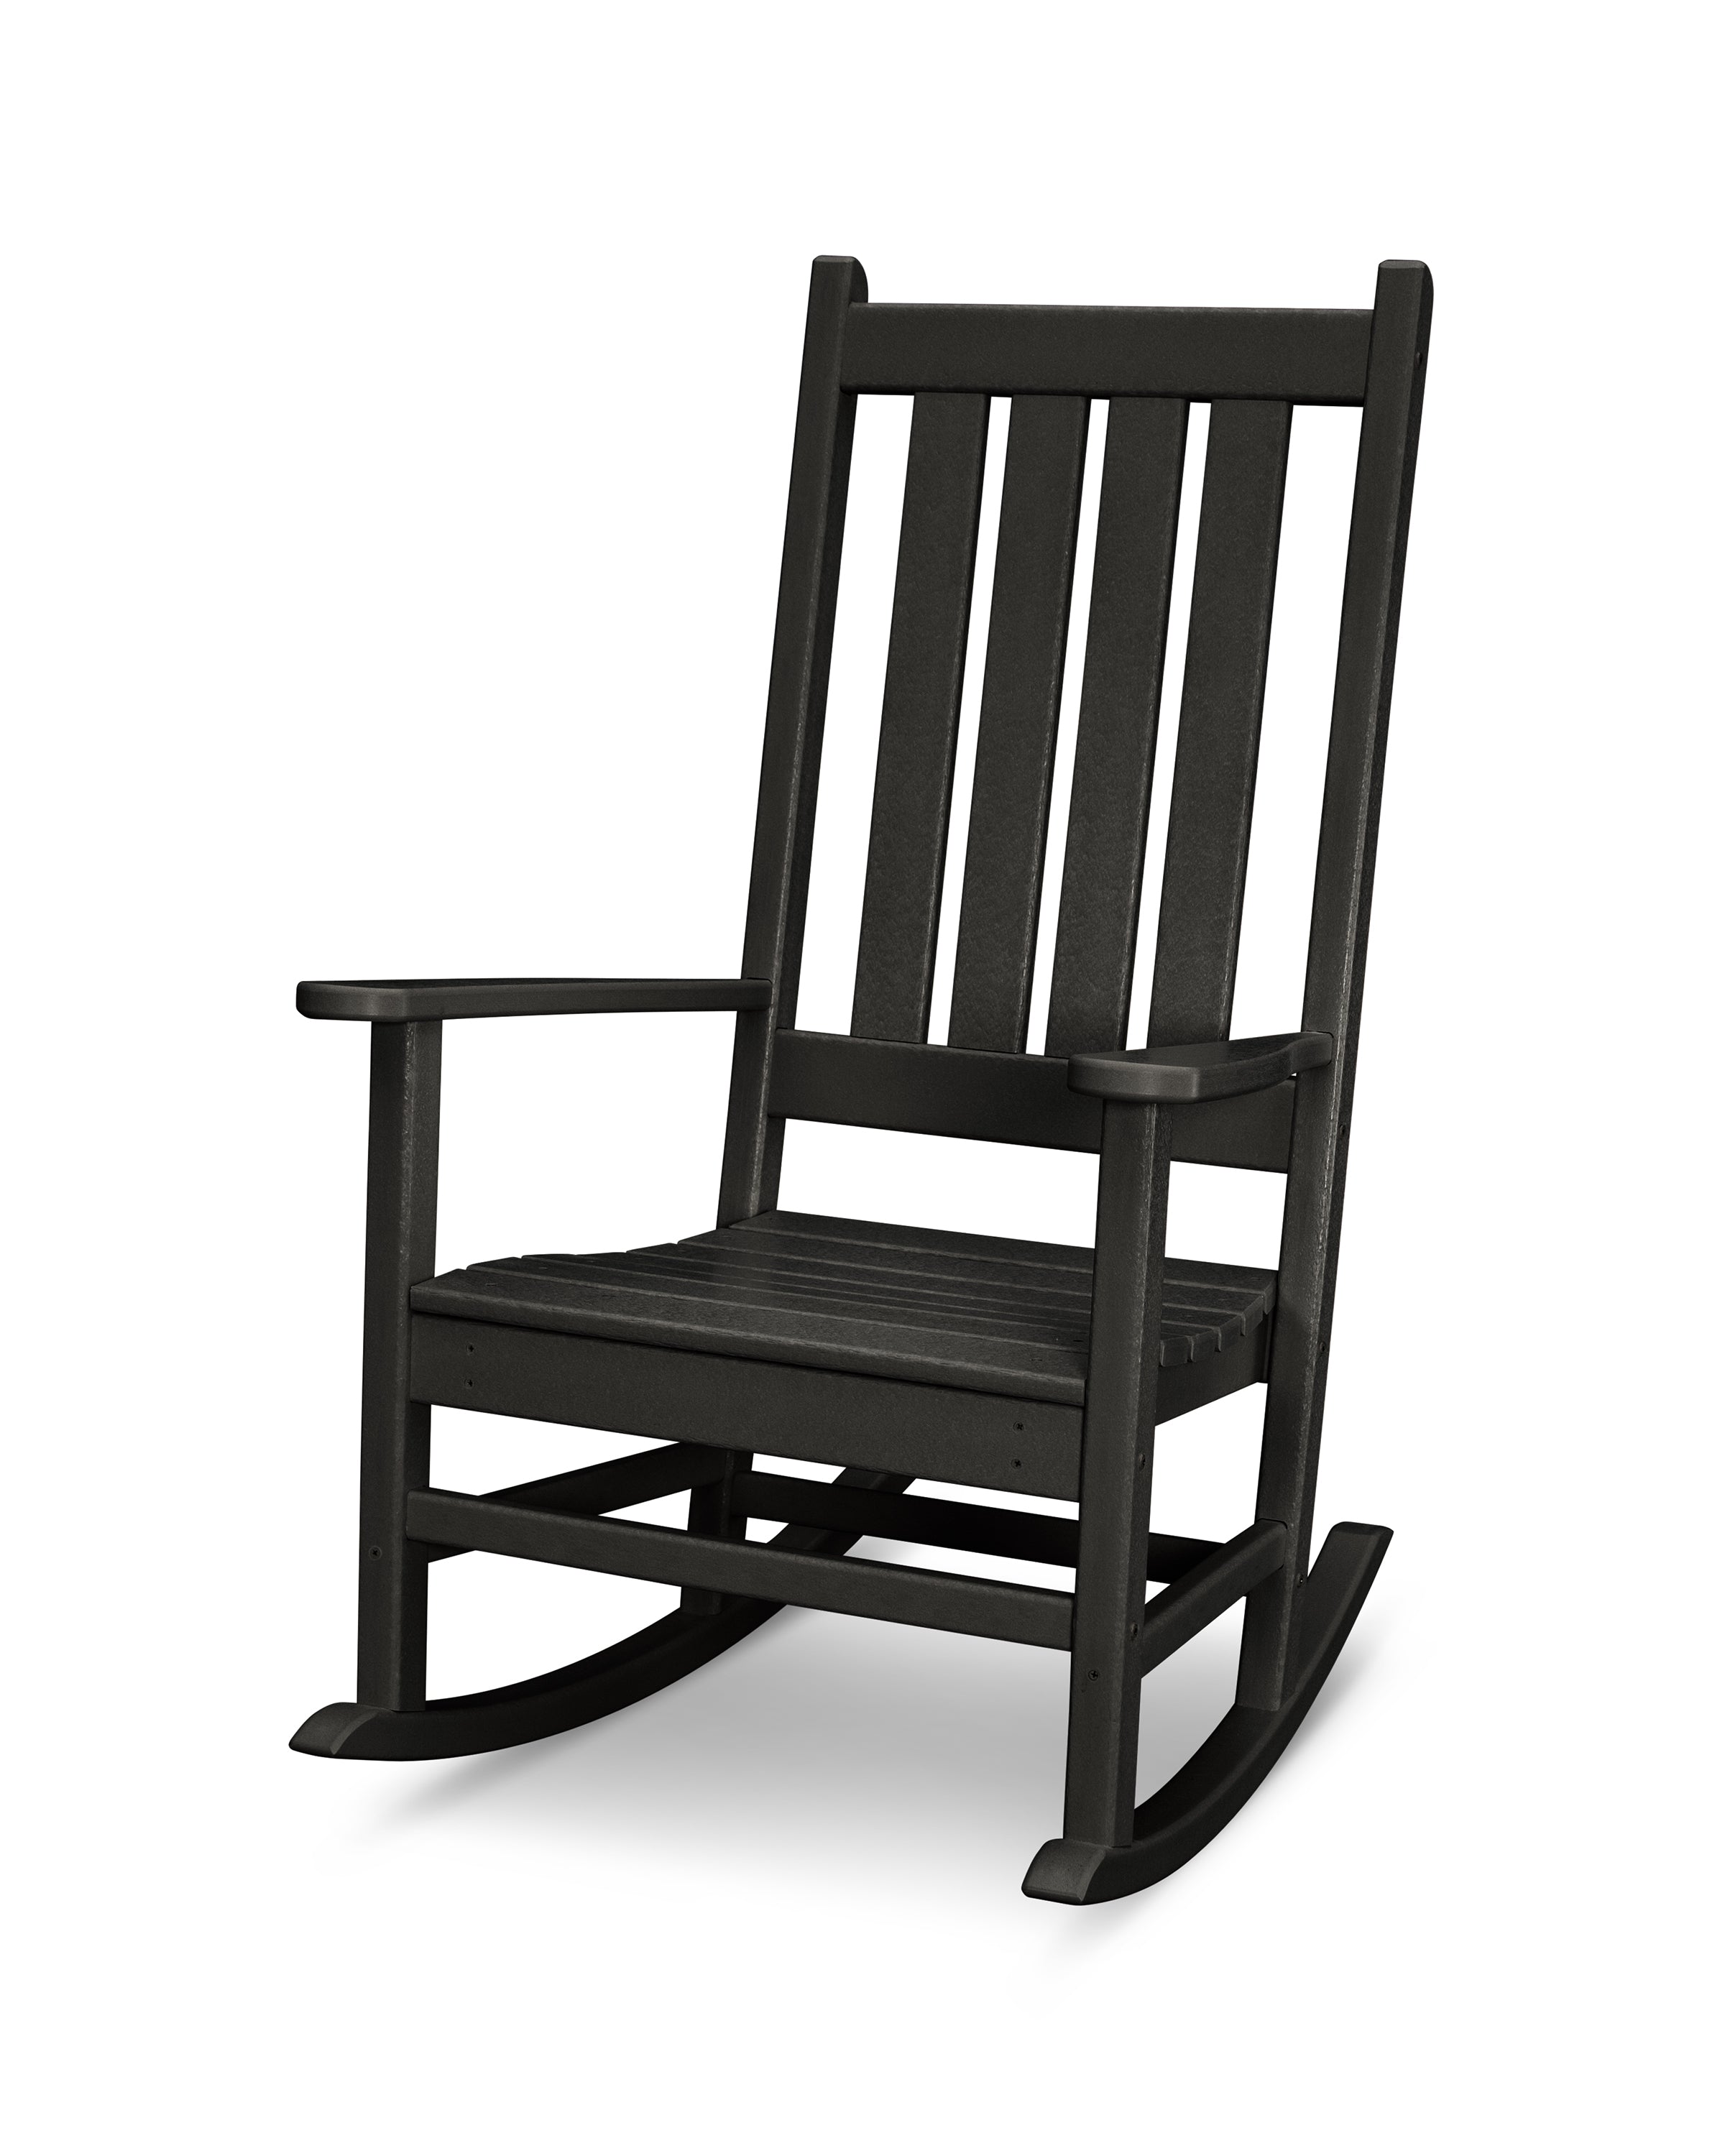 Polywood Vineyard Porch Rocking Chair Outdoor Chairs Black 12031438